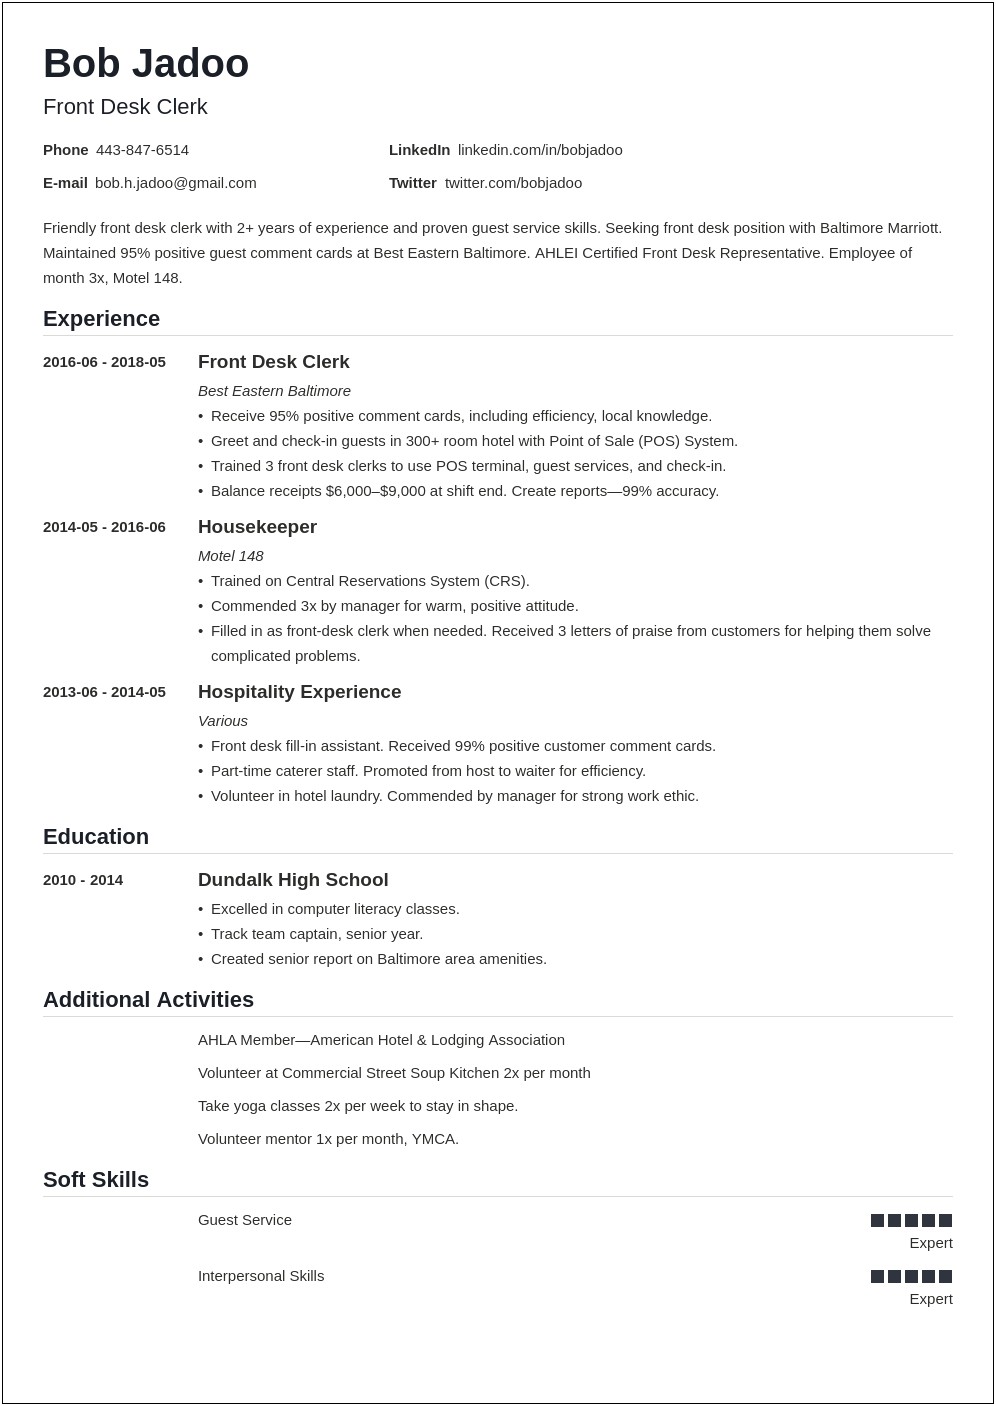 Resume Objective Sample For Hospitality Industry